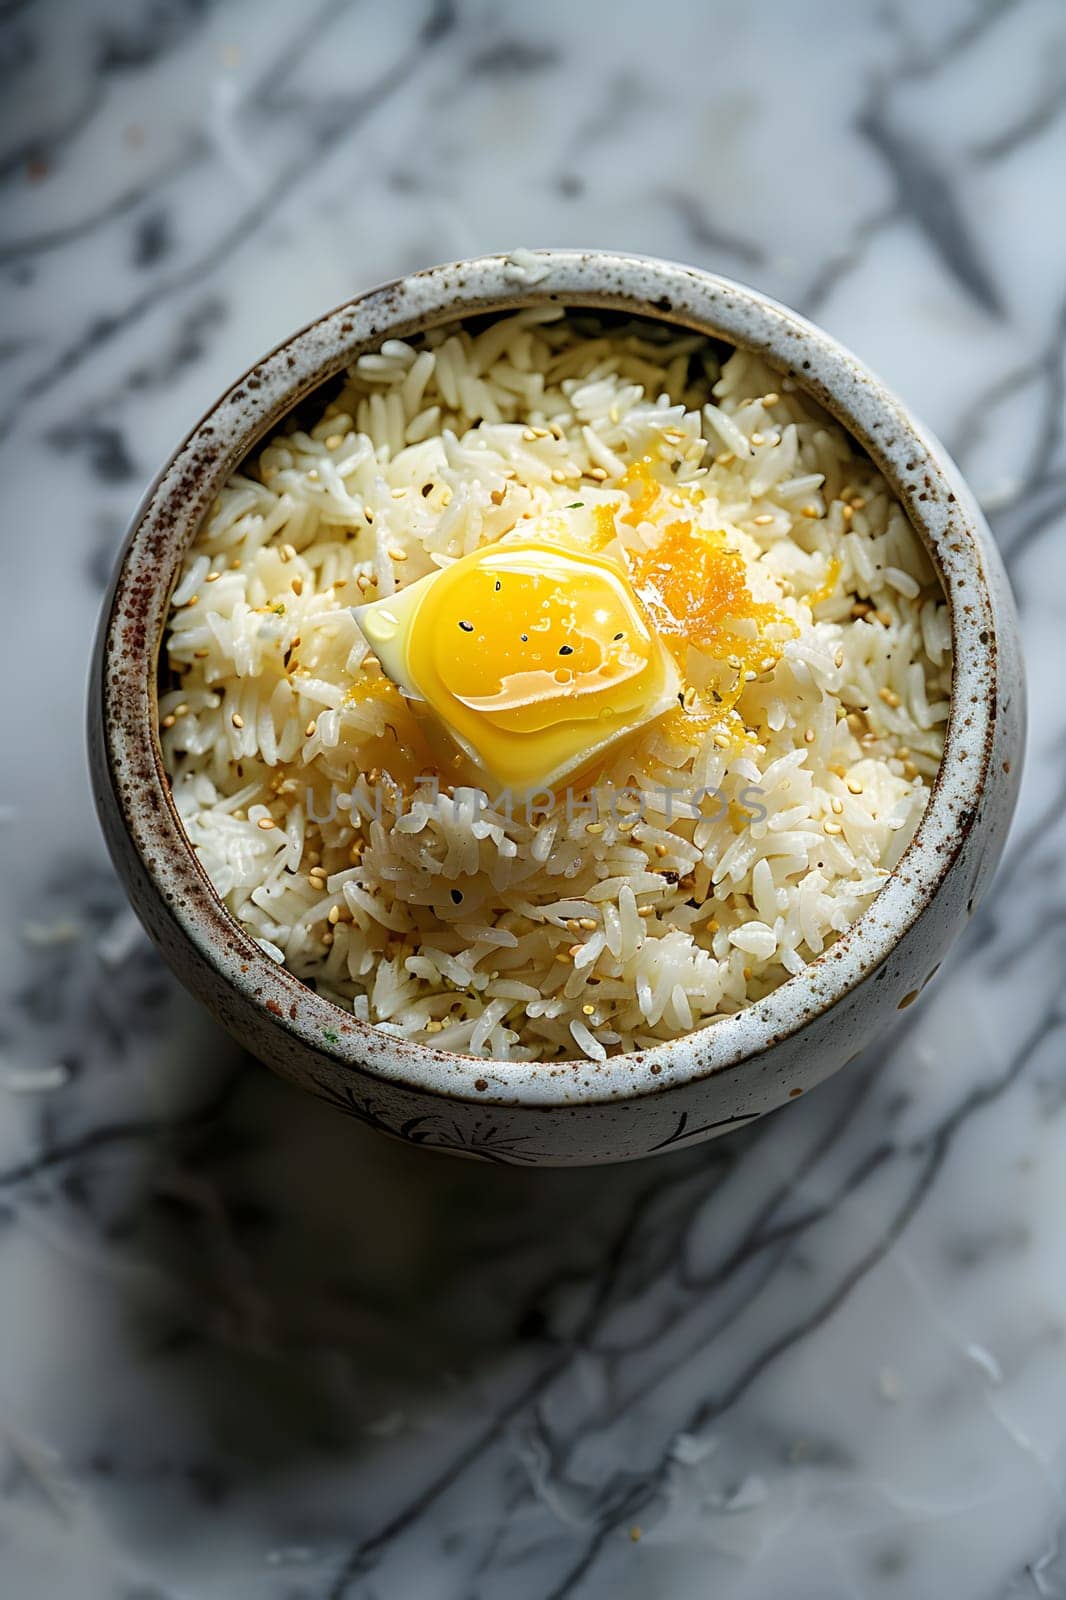 A simple dish made of rice topped with a pat of butter, a humble yet delicious combination of ingredients perfect for any cuisine or meal